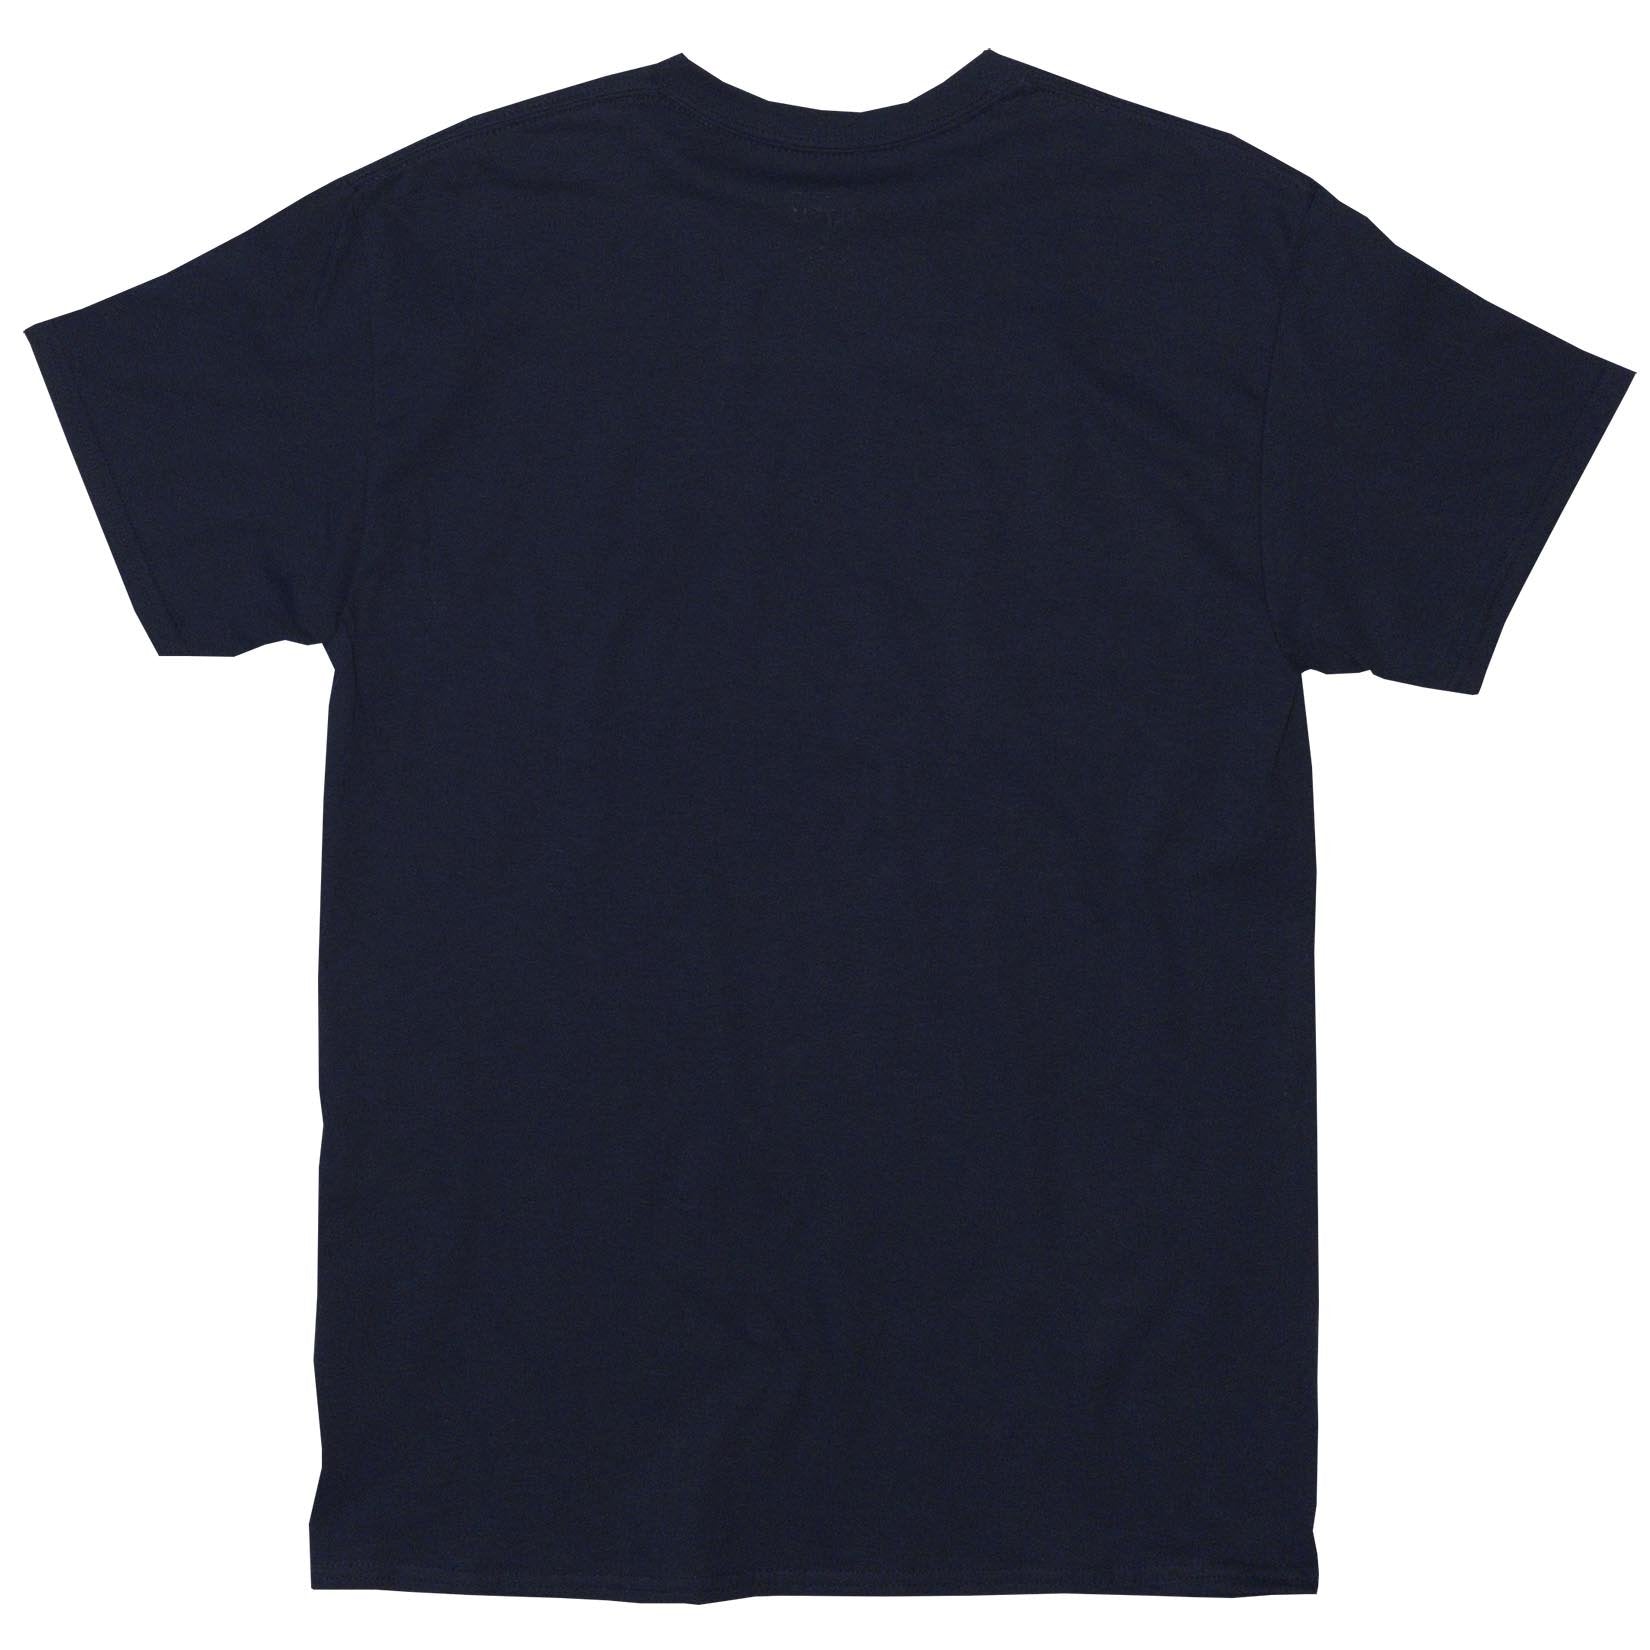 Space Floater NAVY graphic tee by Altru Apparel